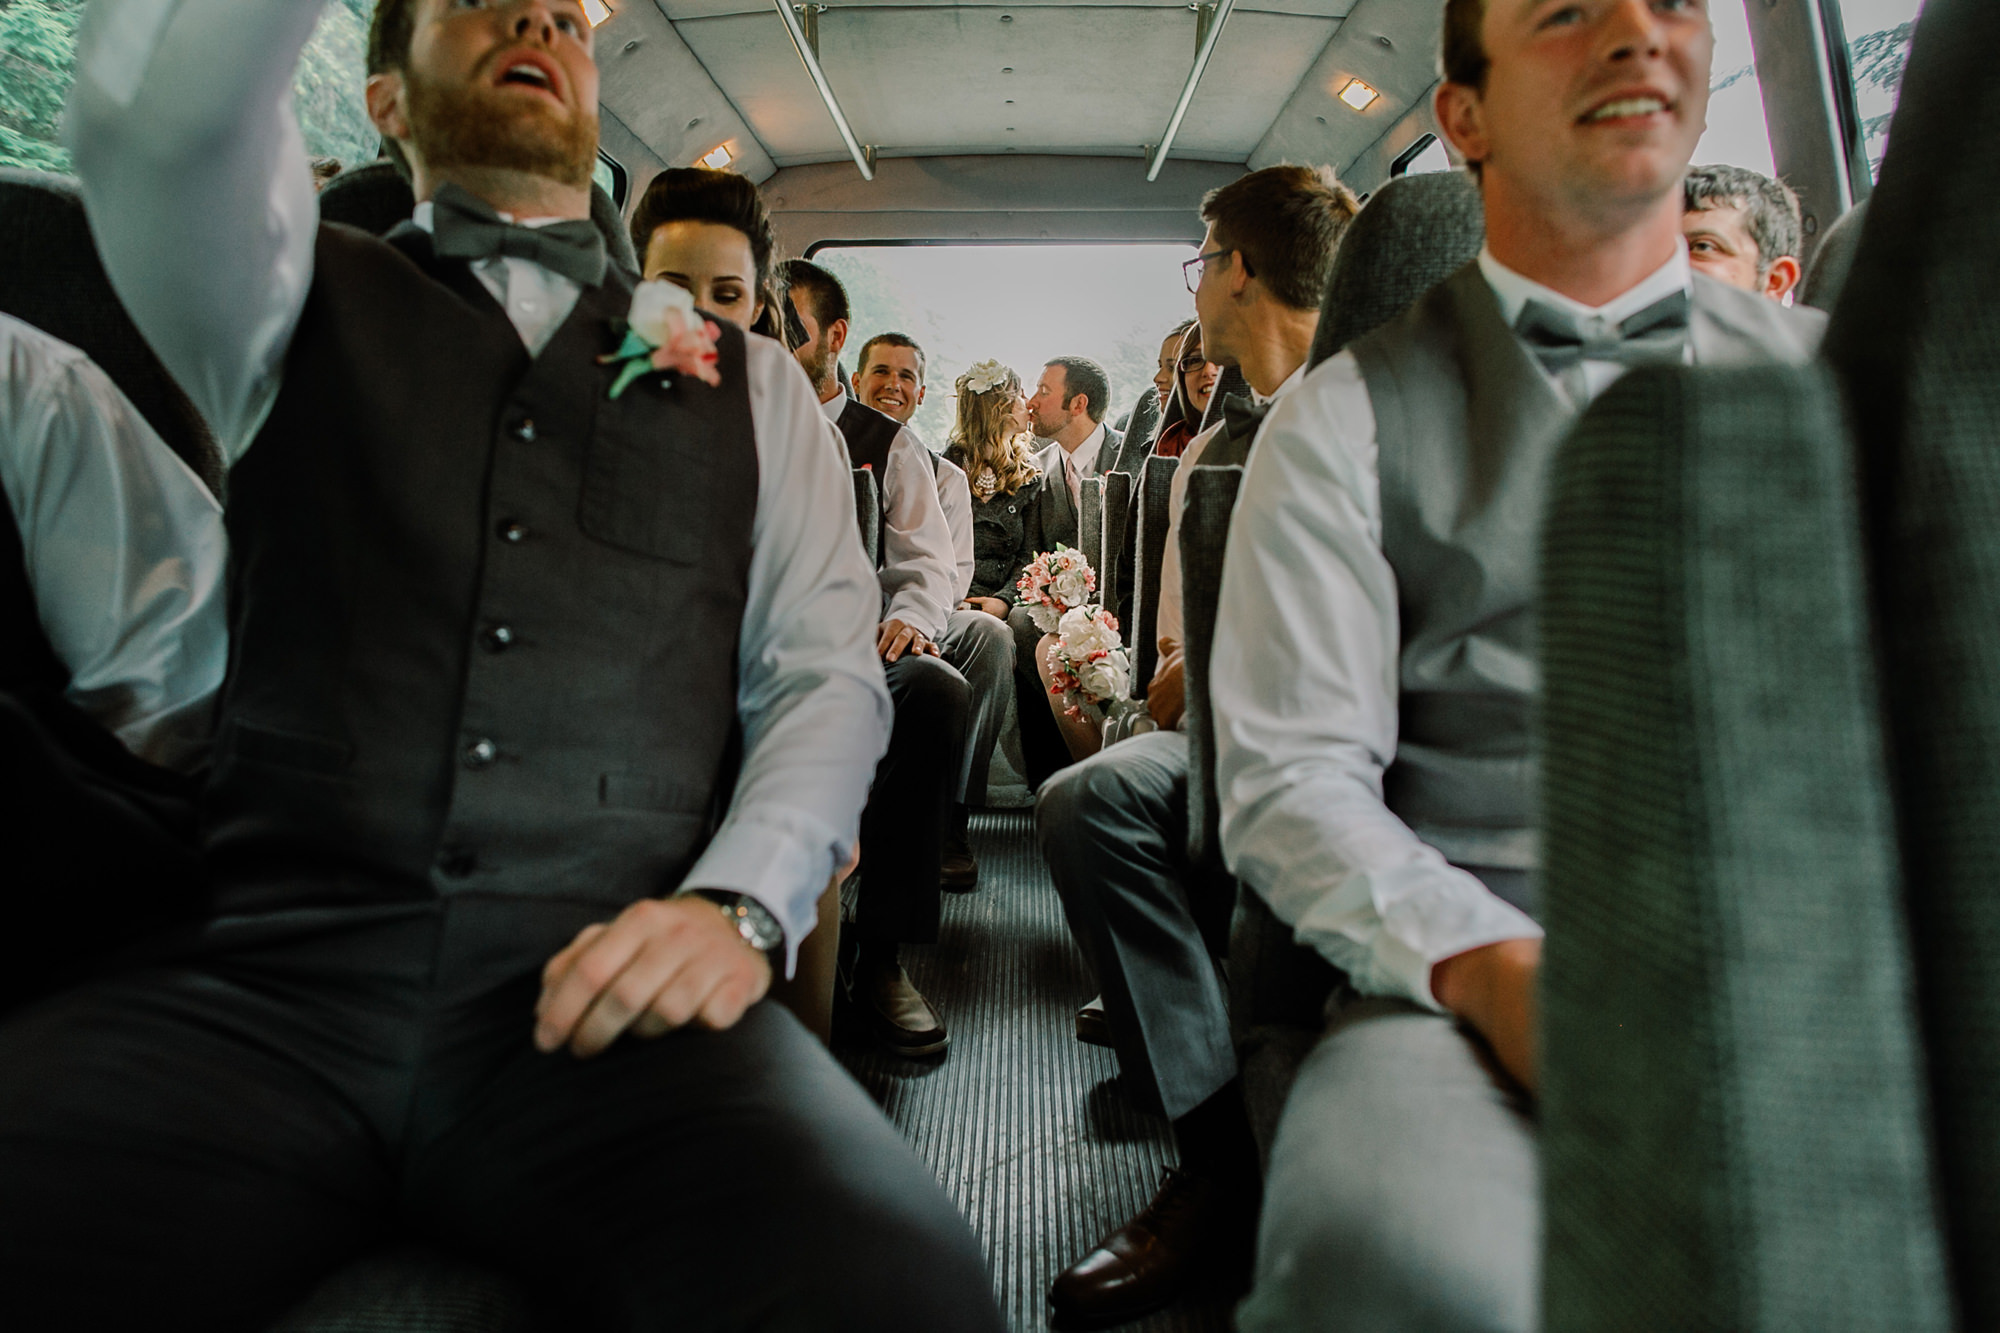 A short bus ride to the wedding ceremony